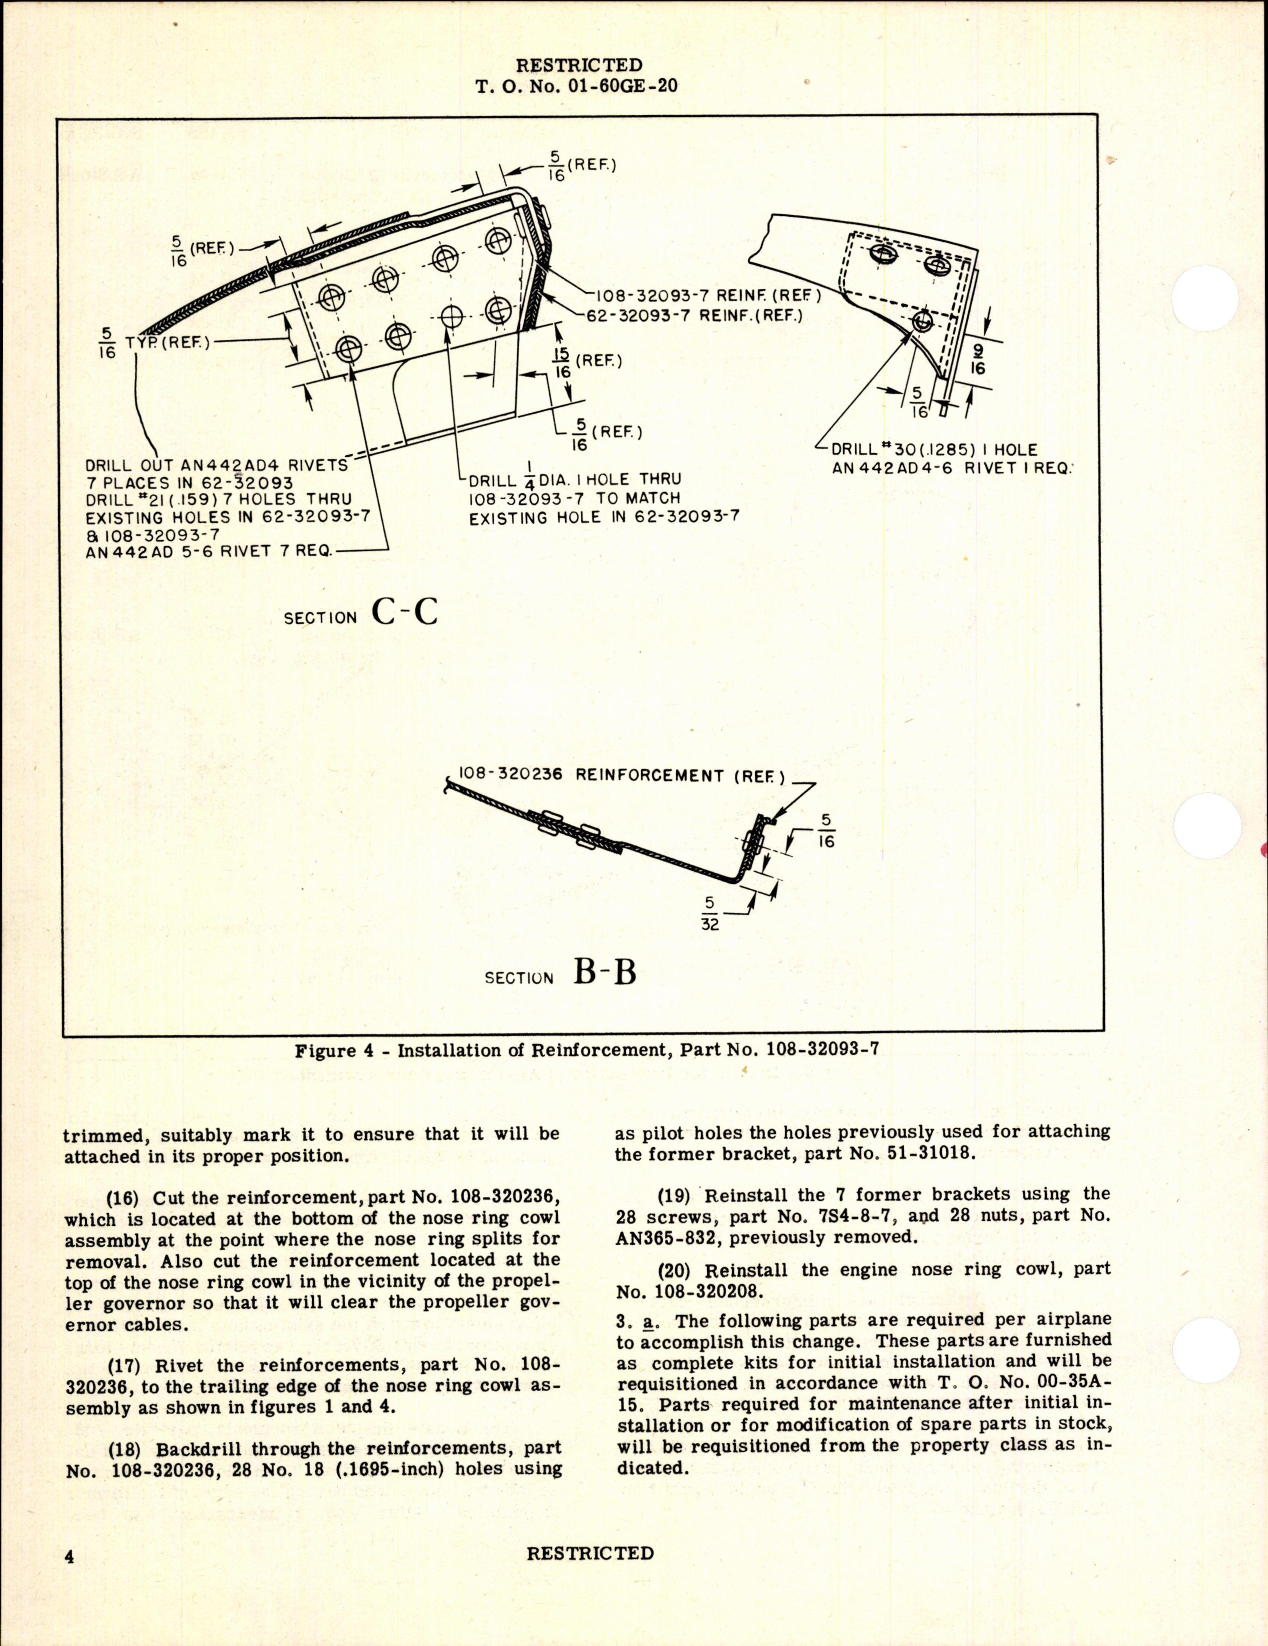 Sample page 4 from AirCorps Library document: Reinforcement of Engine Nose Ring Cowl for B-25J